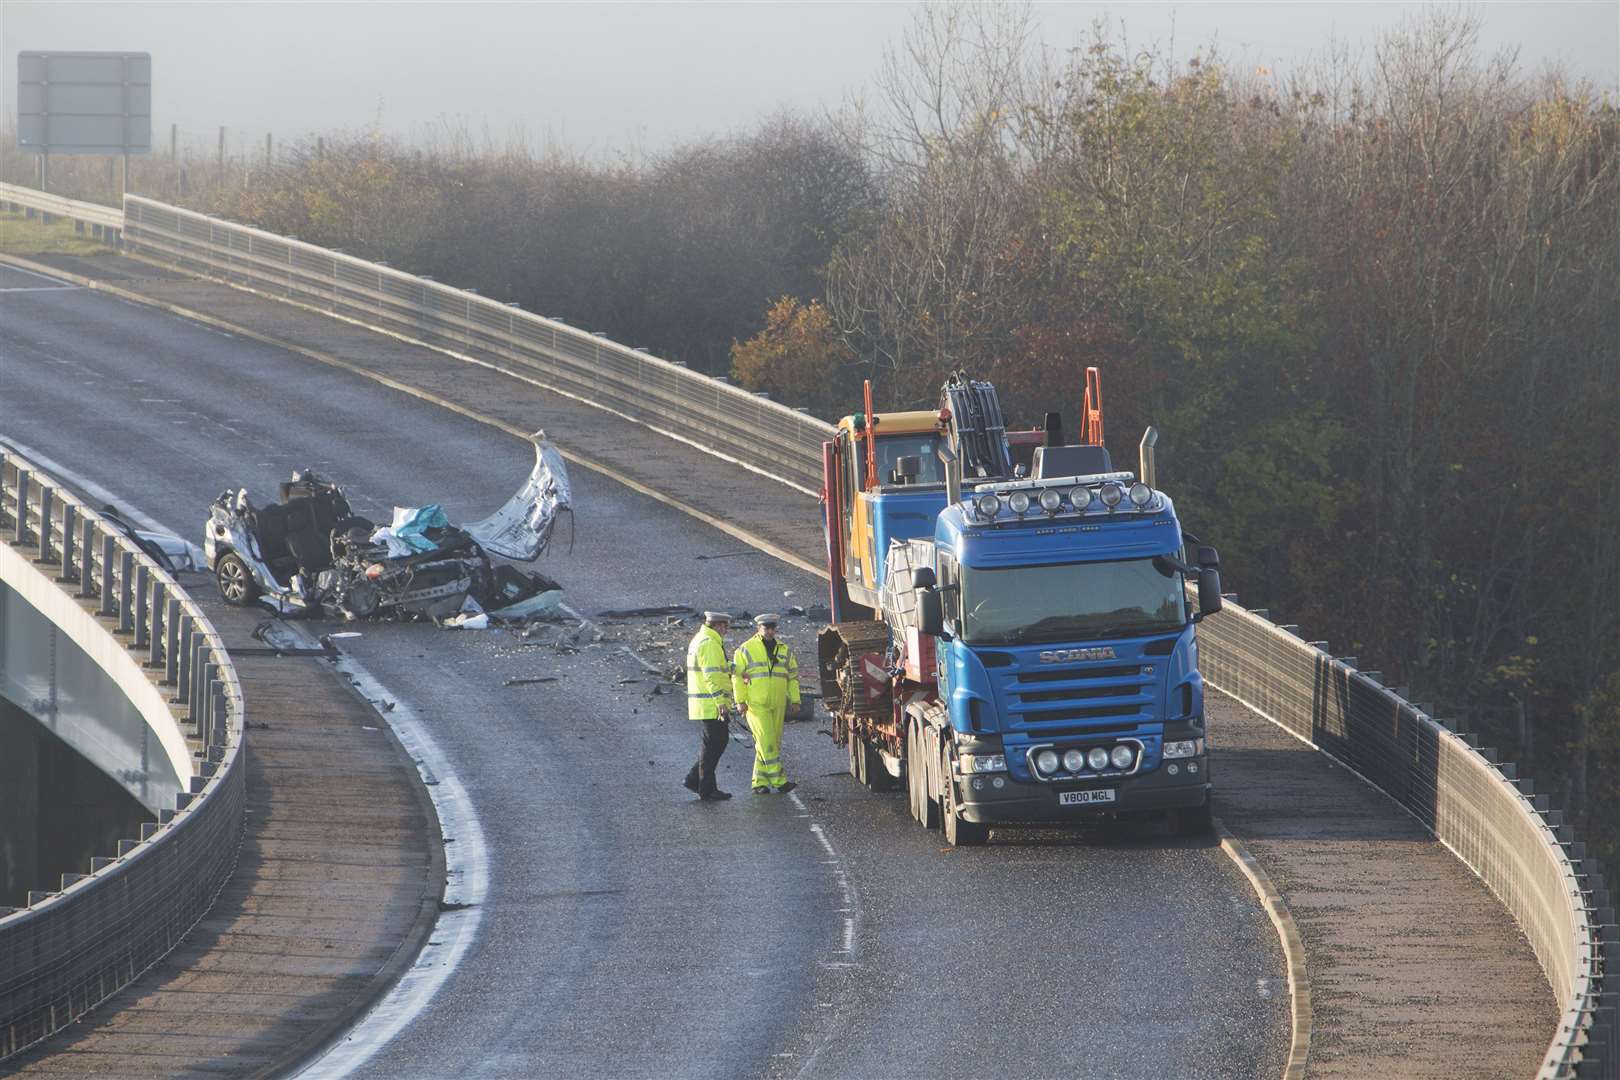 The accident scene on the A9 at Dunbeath on Tuesday. Picture: Robert MacDonald / Northern Studios